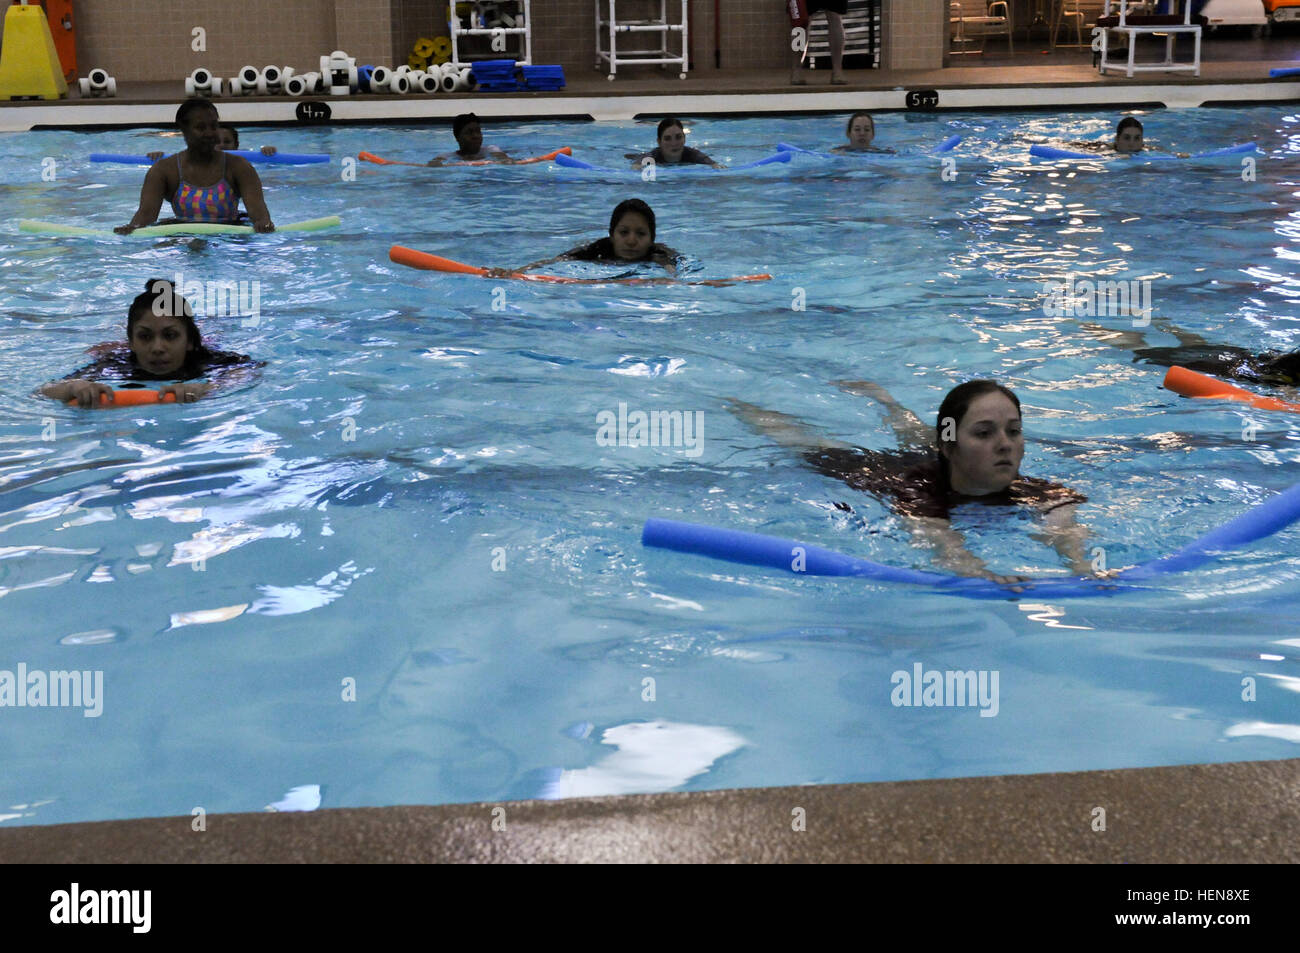 FORT CARSON, Colo. -- Participants in the Pregnancy Postpartum Physical  Training Program use swim noodles as part of their workout, Nov. 20, 2013.  As part of the P3T program swimming provides a